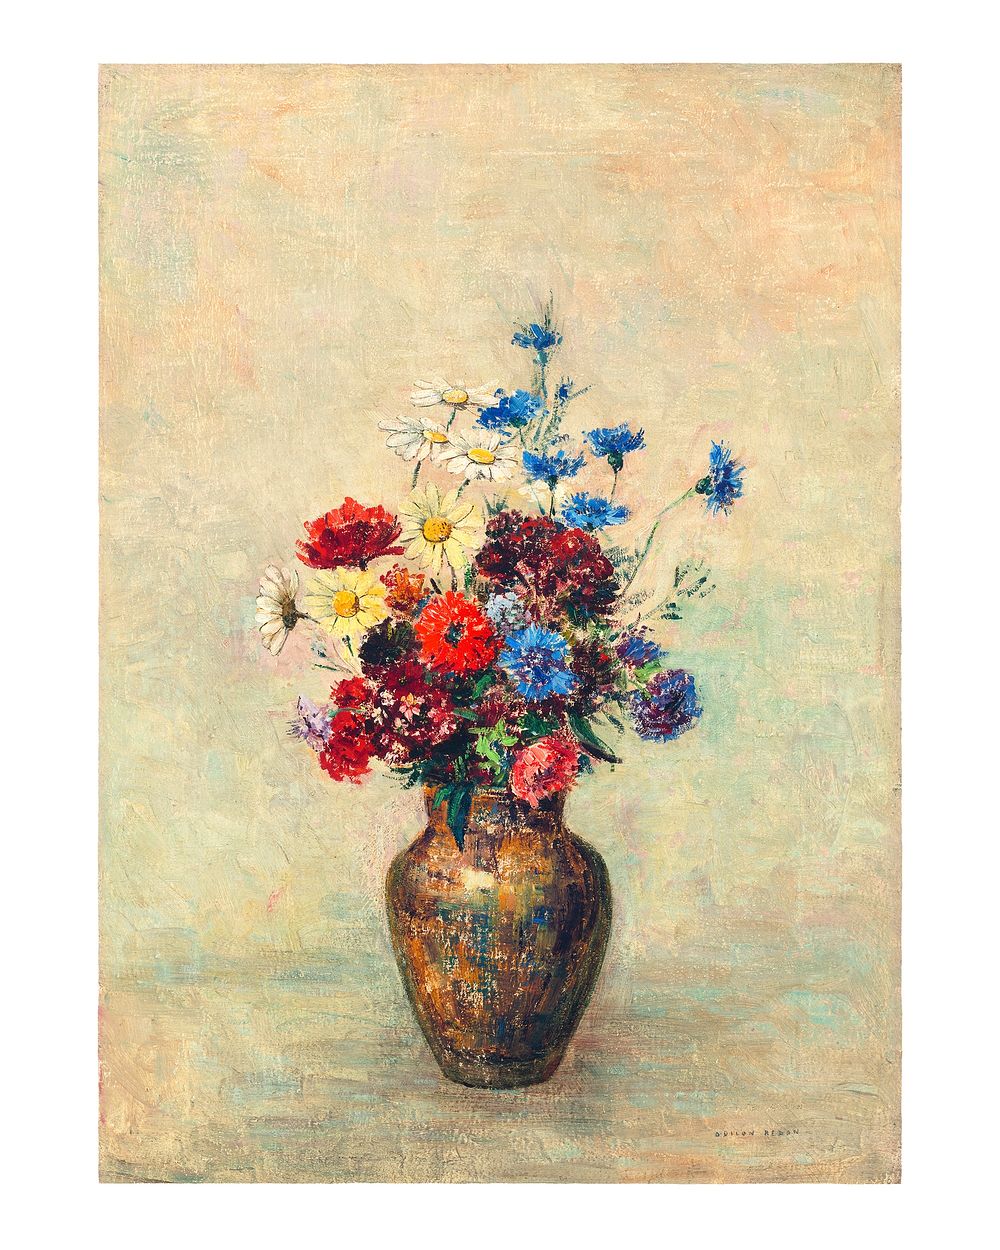 Flowers in a Vase (1910) by Odilon Redon. Original from the National Gallery of Art. Digitally enhanced by rawpixel.